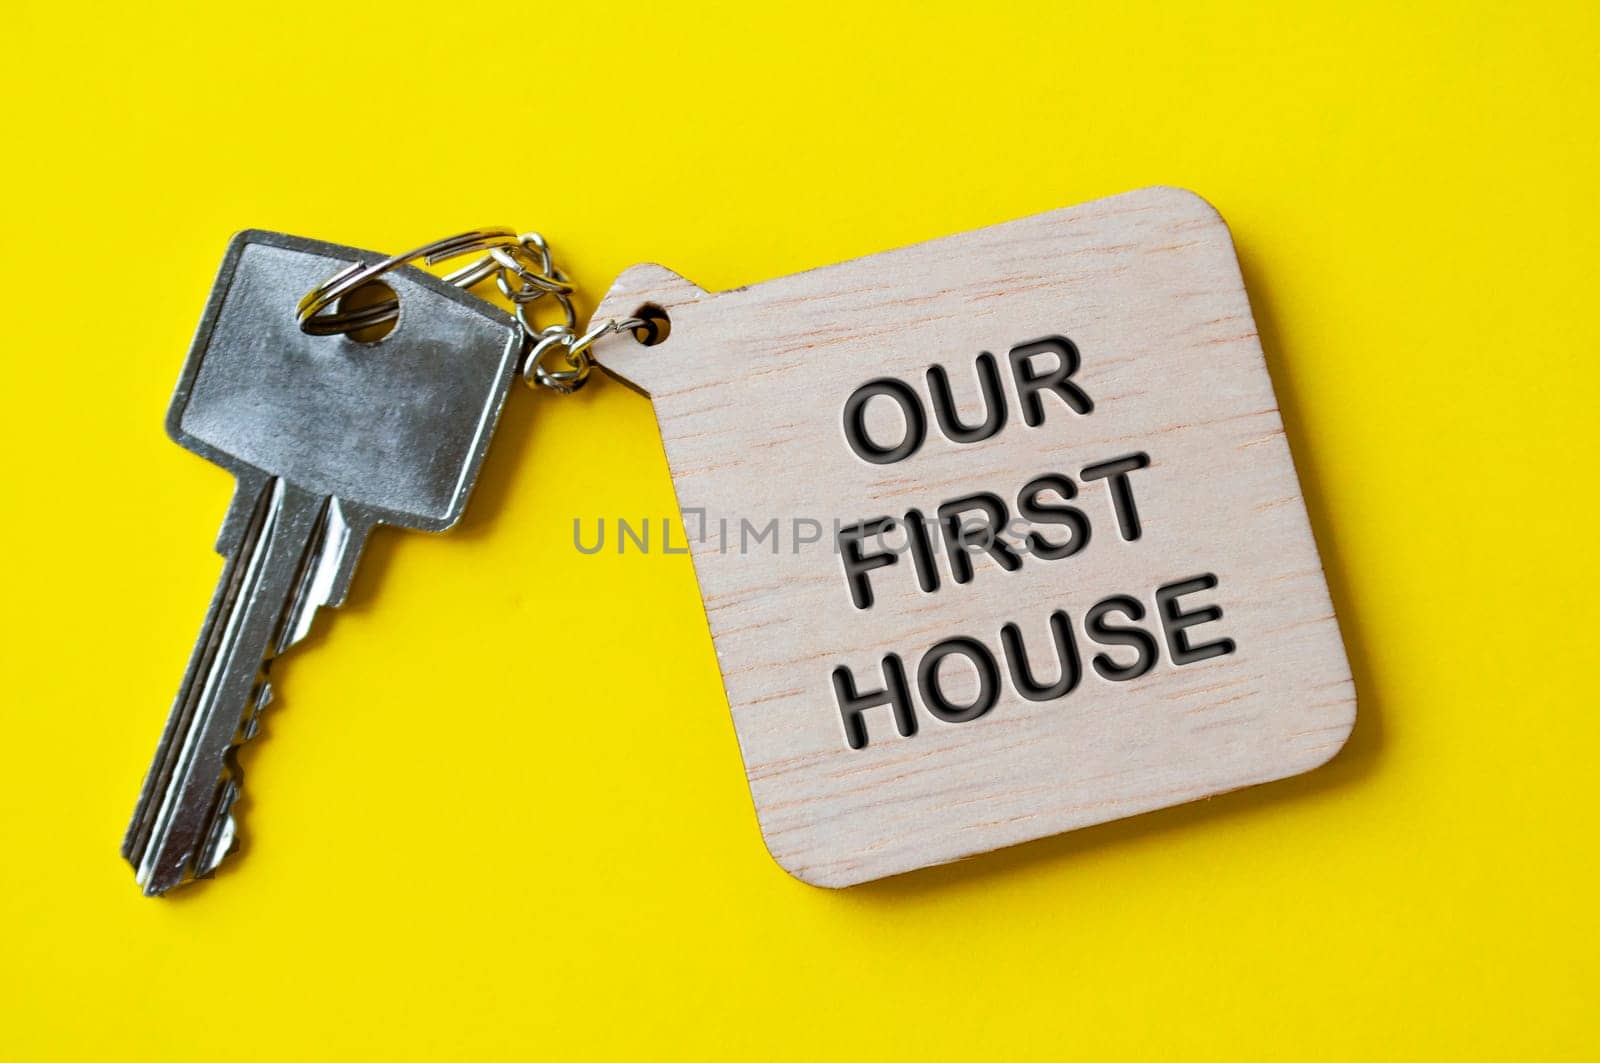 Our first house text engraved on wooden key chain.